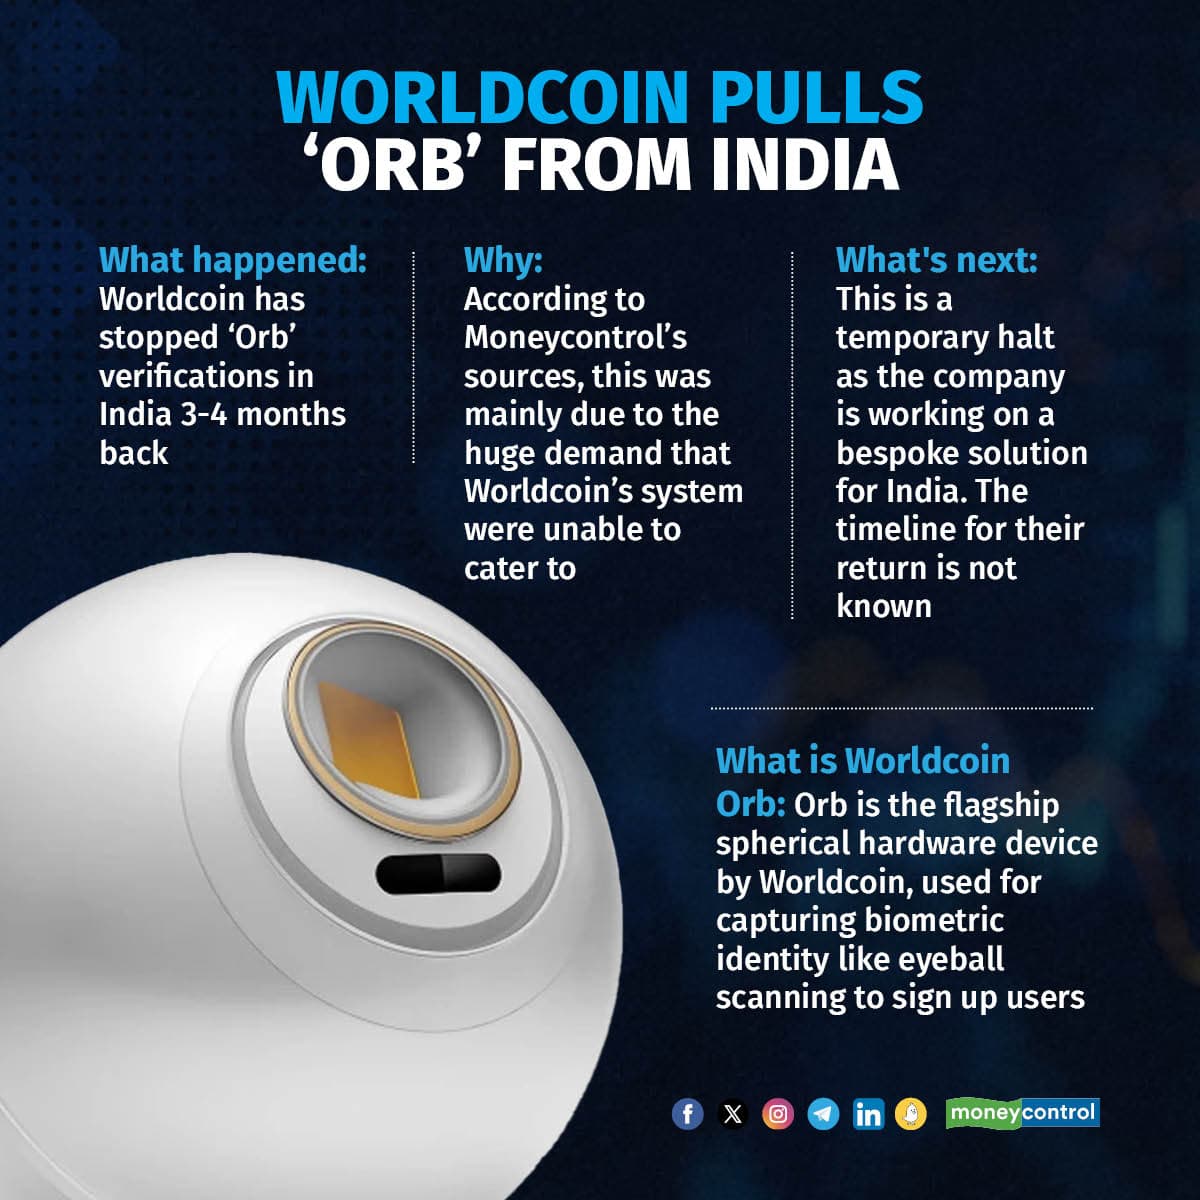 Worldcoin is no longer offering Orb-verification in India, Brazil